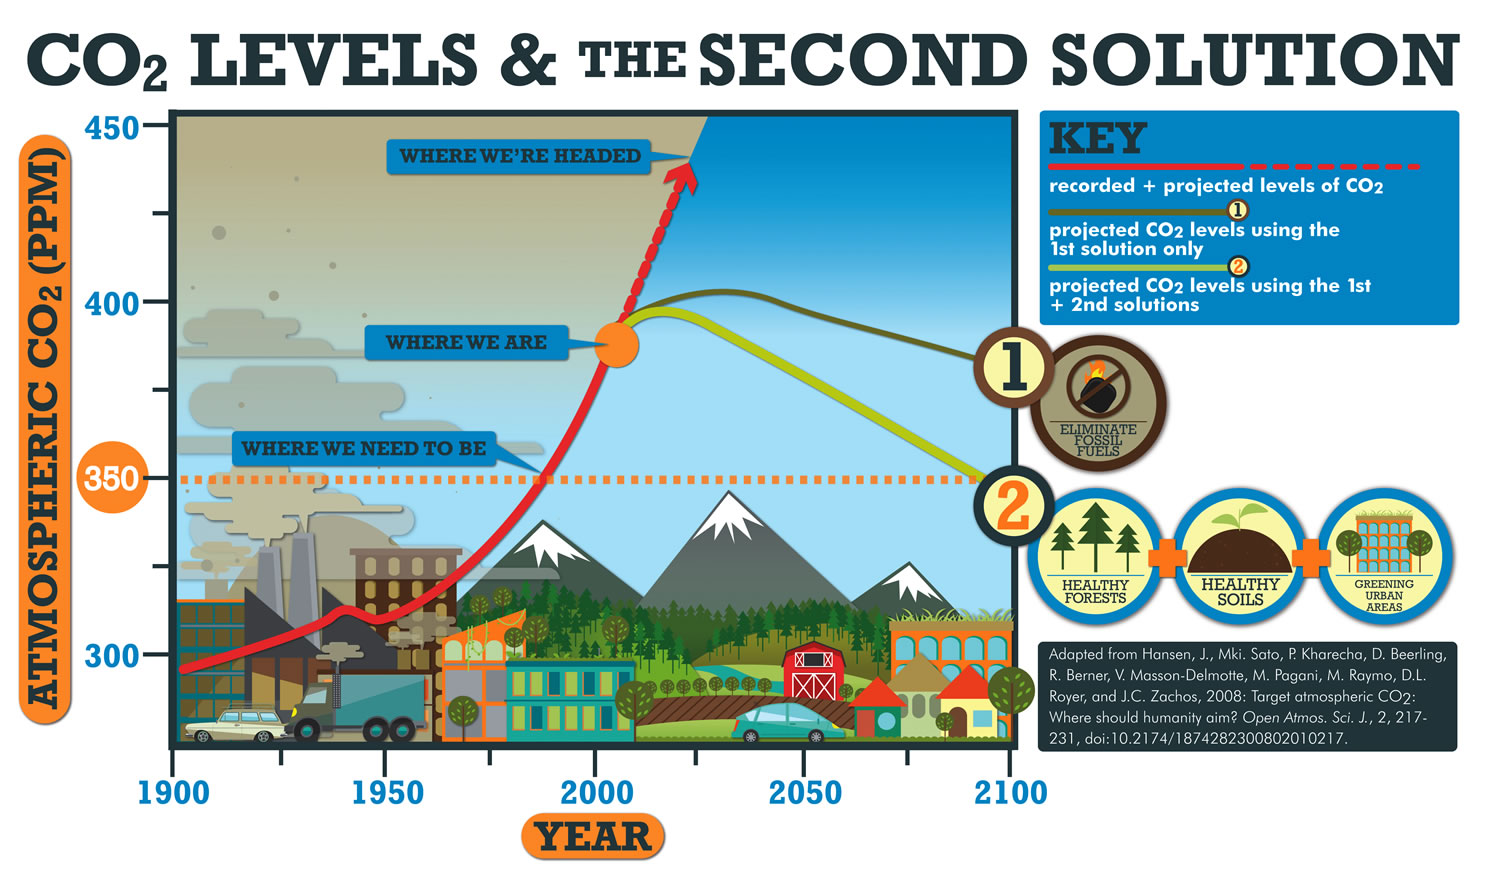 CO2 Levels and the Second Solutions